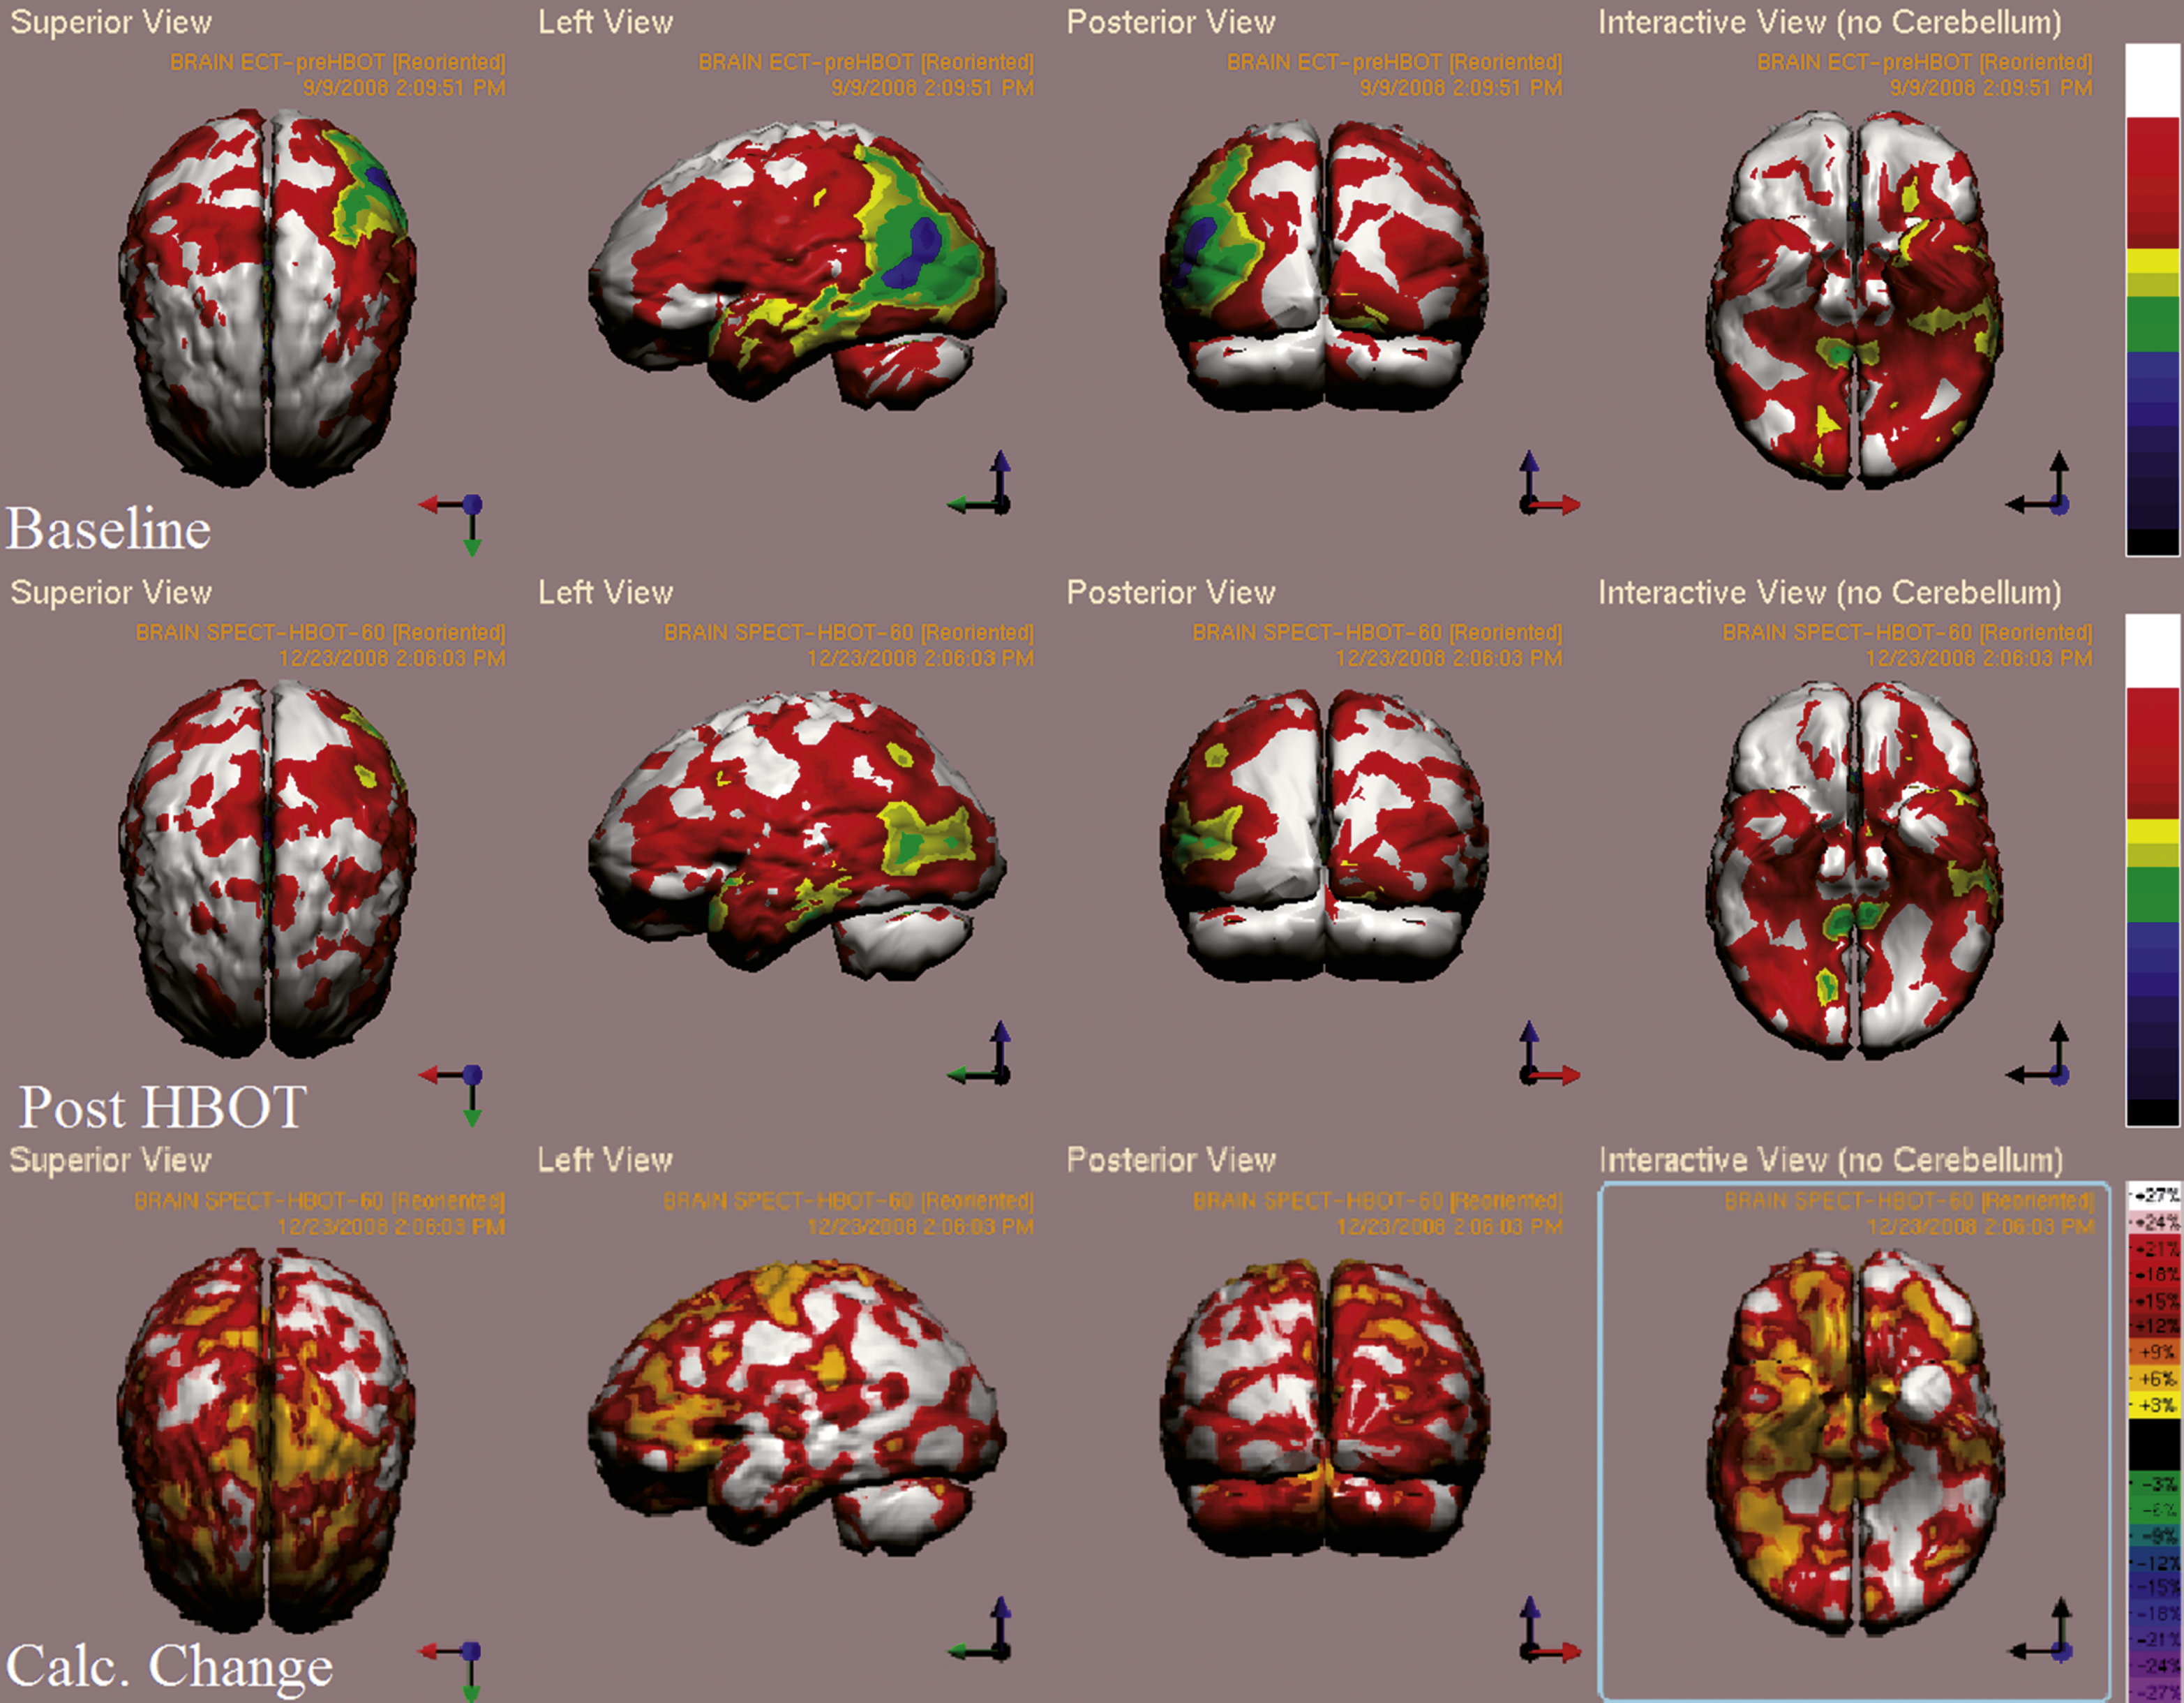 Case 2 SPECT calculated change after HBO2 compared to baseline. In the first two rows colors represent maximal functional brain activity relative to brain median activity, where in the bottom row colors represent the regional change in functional brain activity. White and red areas show the highest changes in CBF.